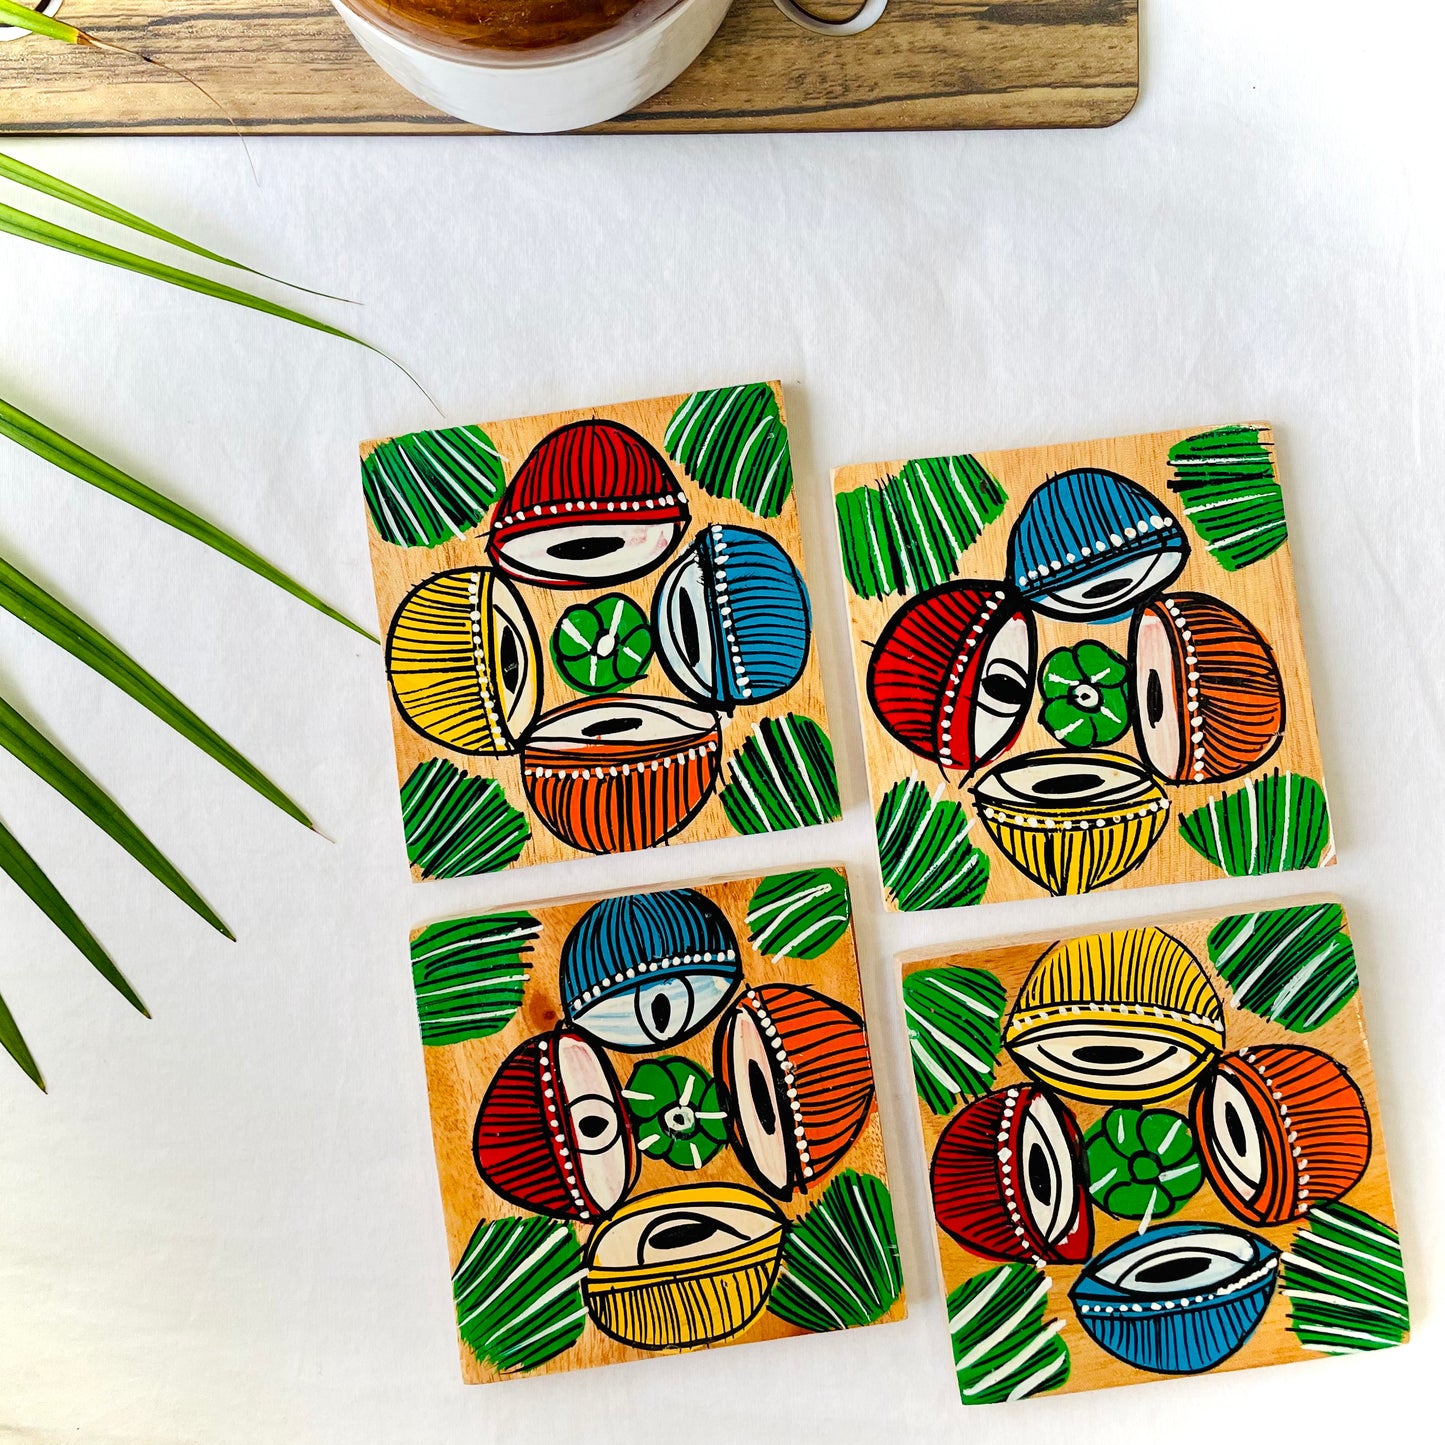 Four pure mango wood square wooden coasters, with a painting of four tabla, a type of Indian classical musical instrument in each wood coaster